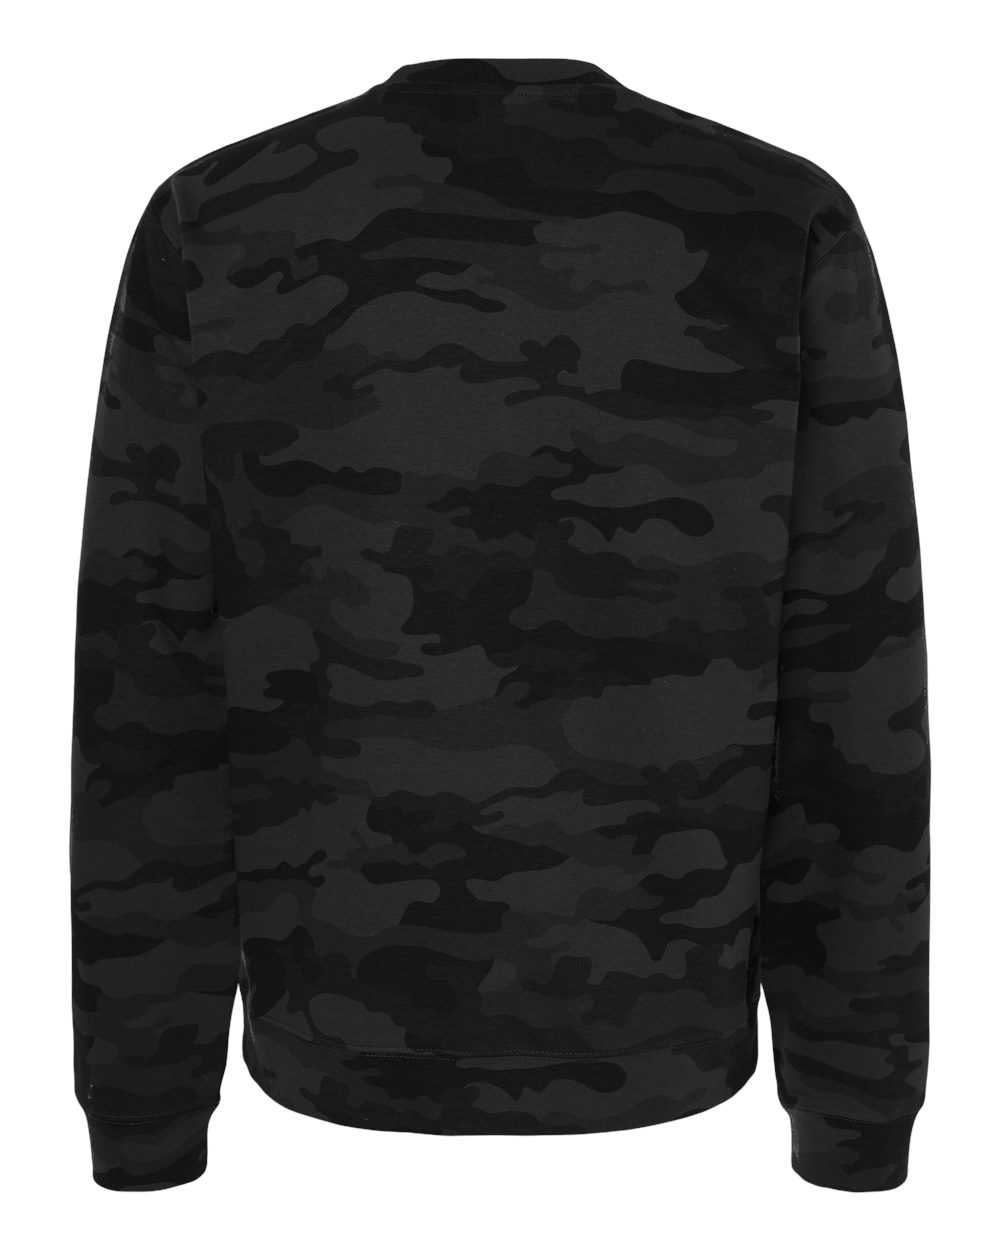 Independent Trading Co SS3000 Midweight Sweatshirt - Black Camo - HIT a Double - 3